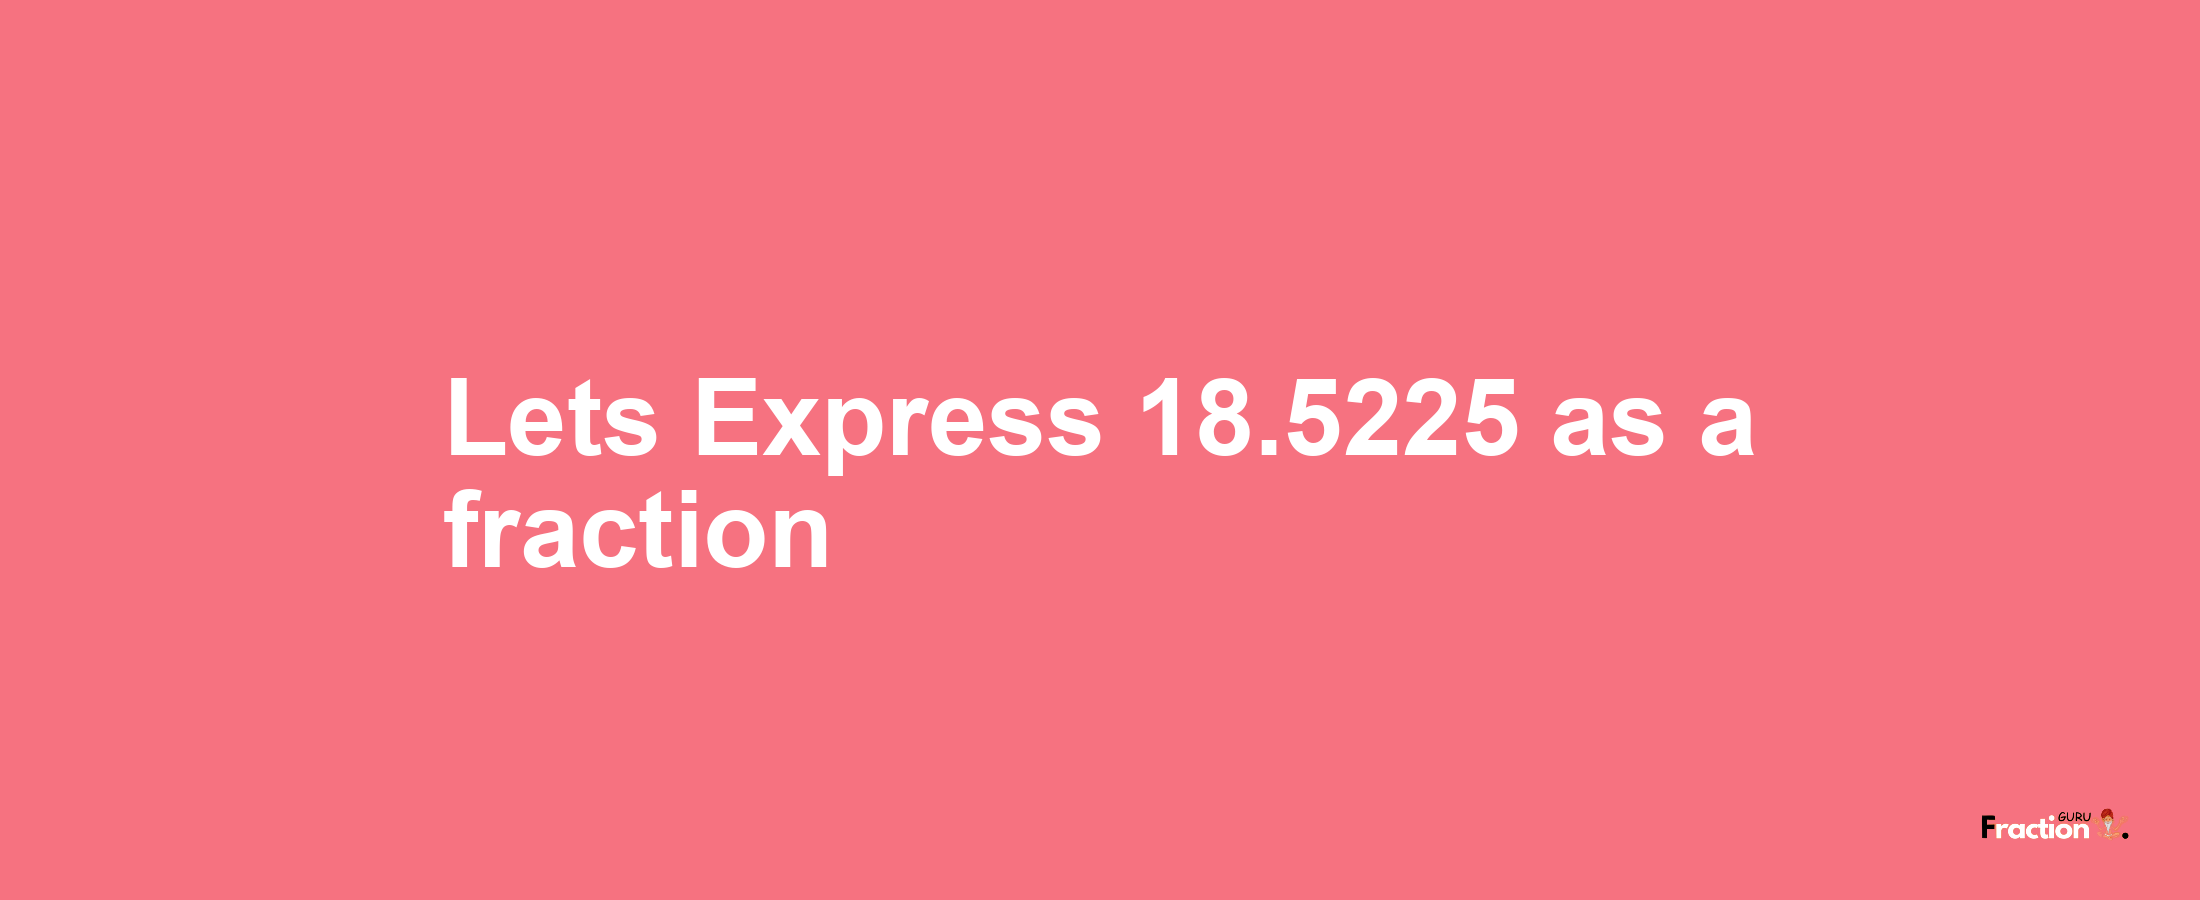 Lets Express 18.5225 as afraction